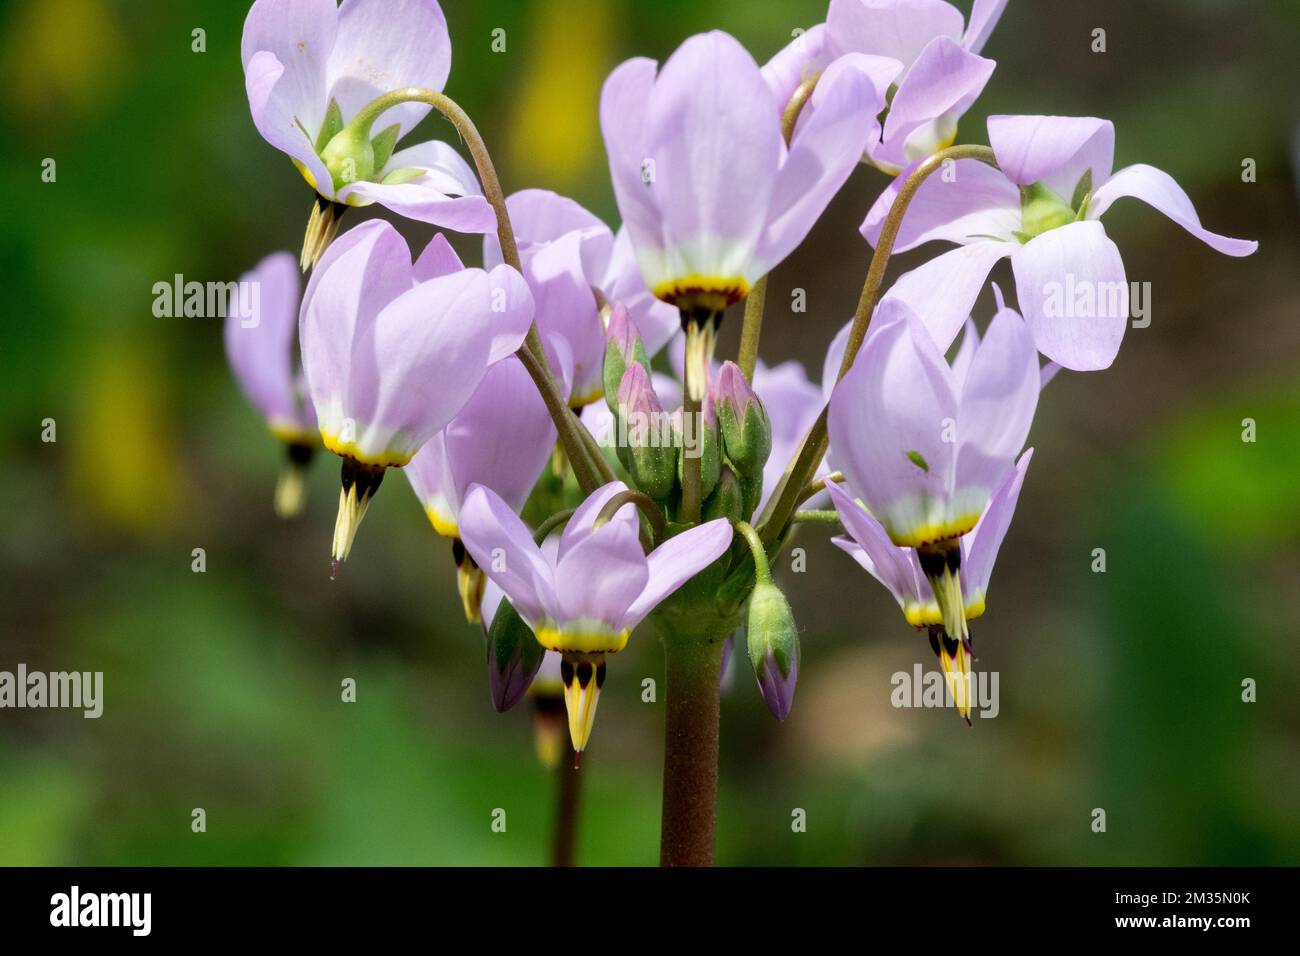 Lowland Shooting Star, Dodecatheon clevelandii, Bloom, primo piano, Fiore Foto Stock